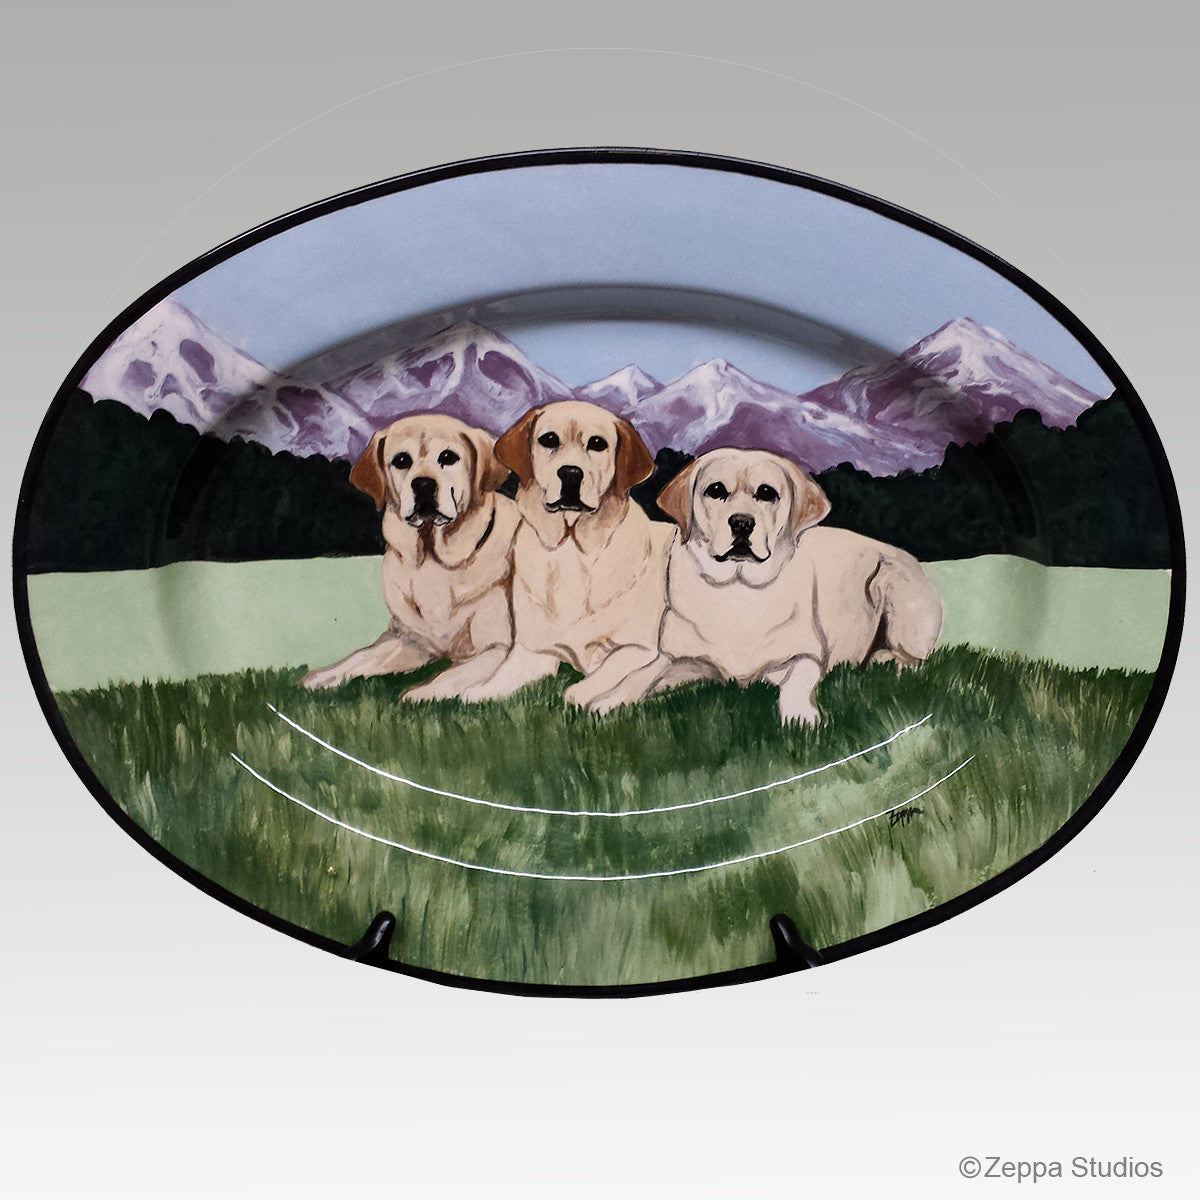 Gallery Style Hand Painted Rim Platter, Three Yellow Labs